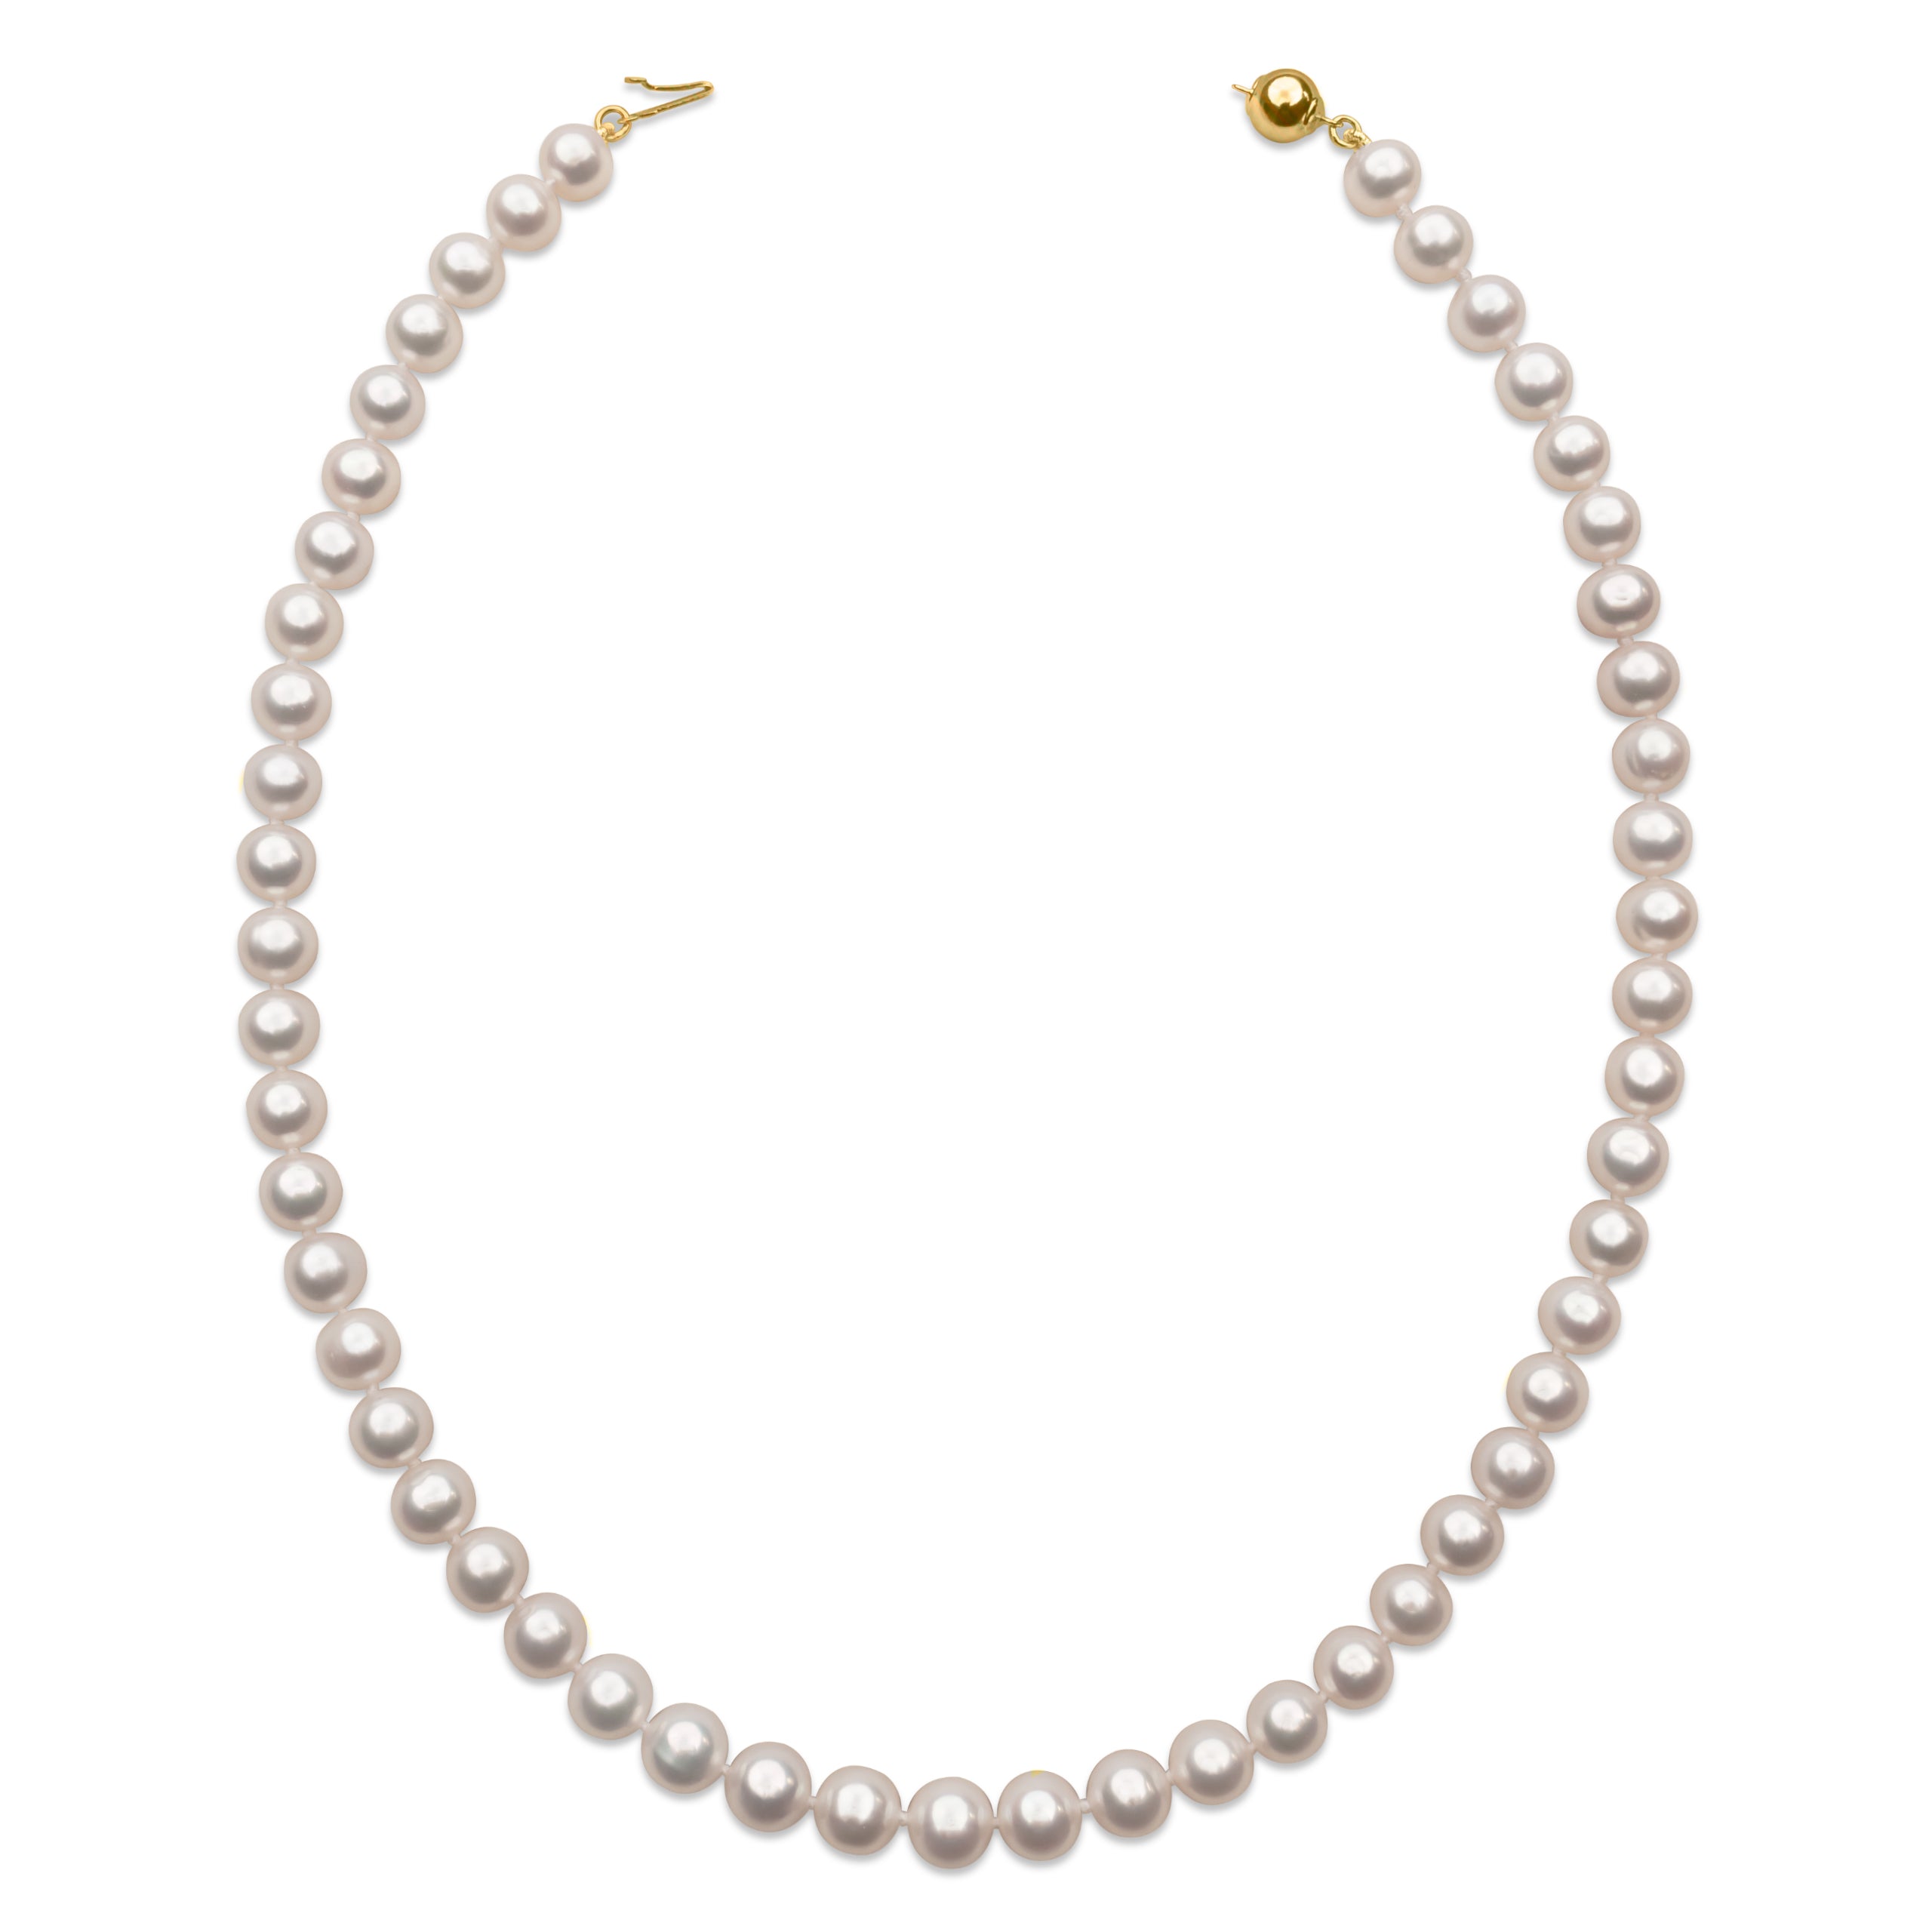 7.5-8.5mm AAA Freshwater Cultured Pearl Necklace, 90cm Long | 18K Gold